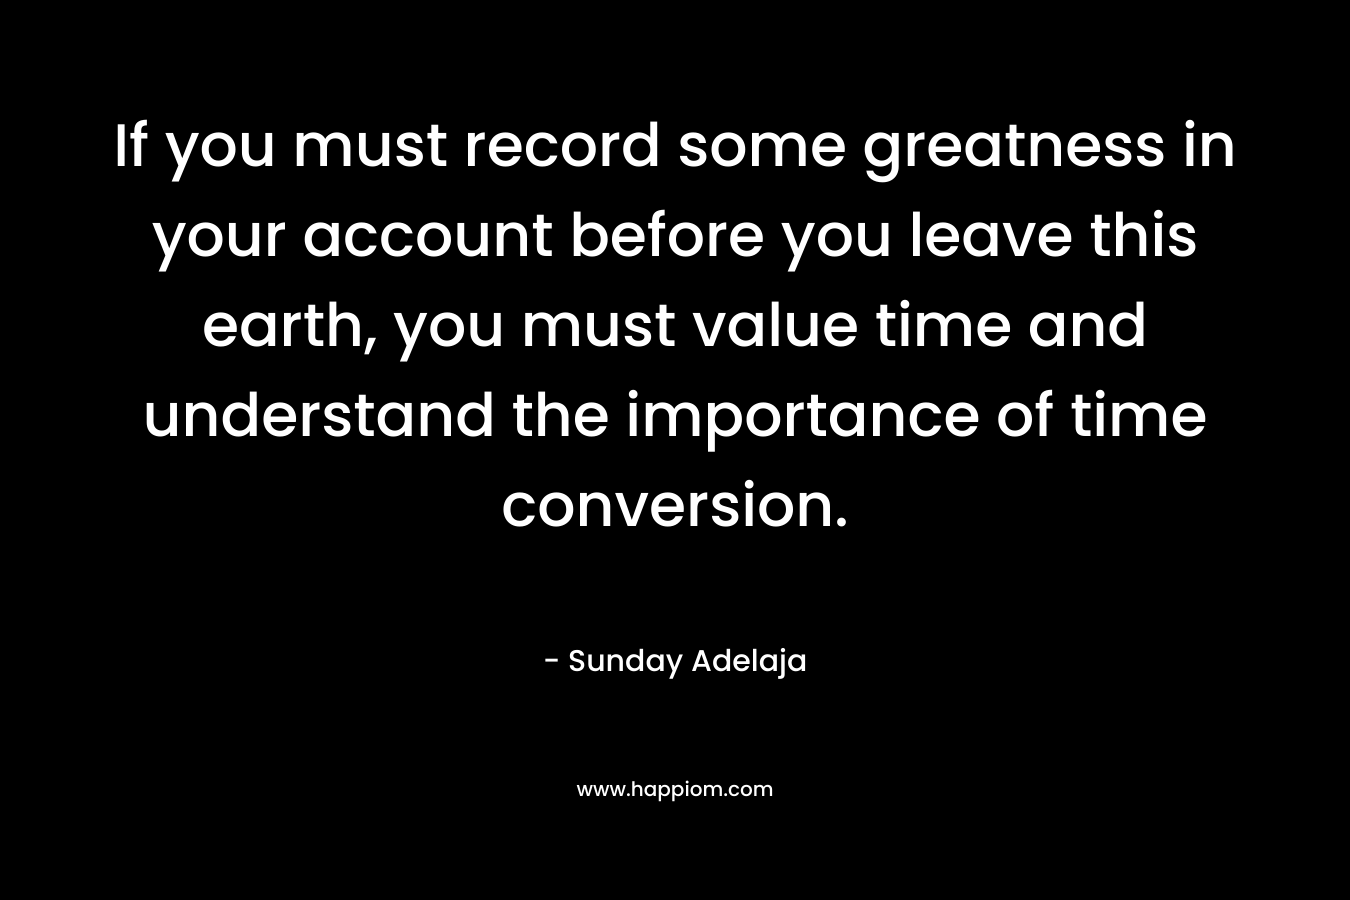 If you must record some greatness in your account before you leave this earth, you must value time and understand the importance of time conversion.